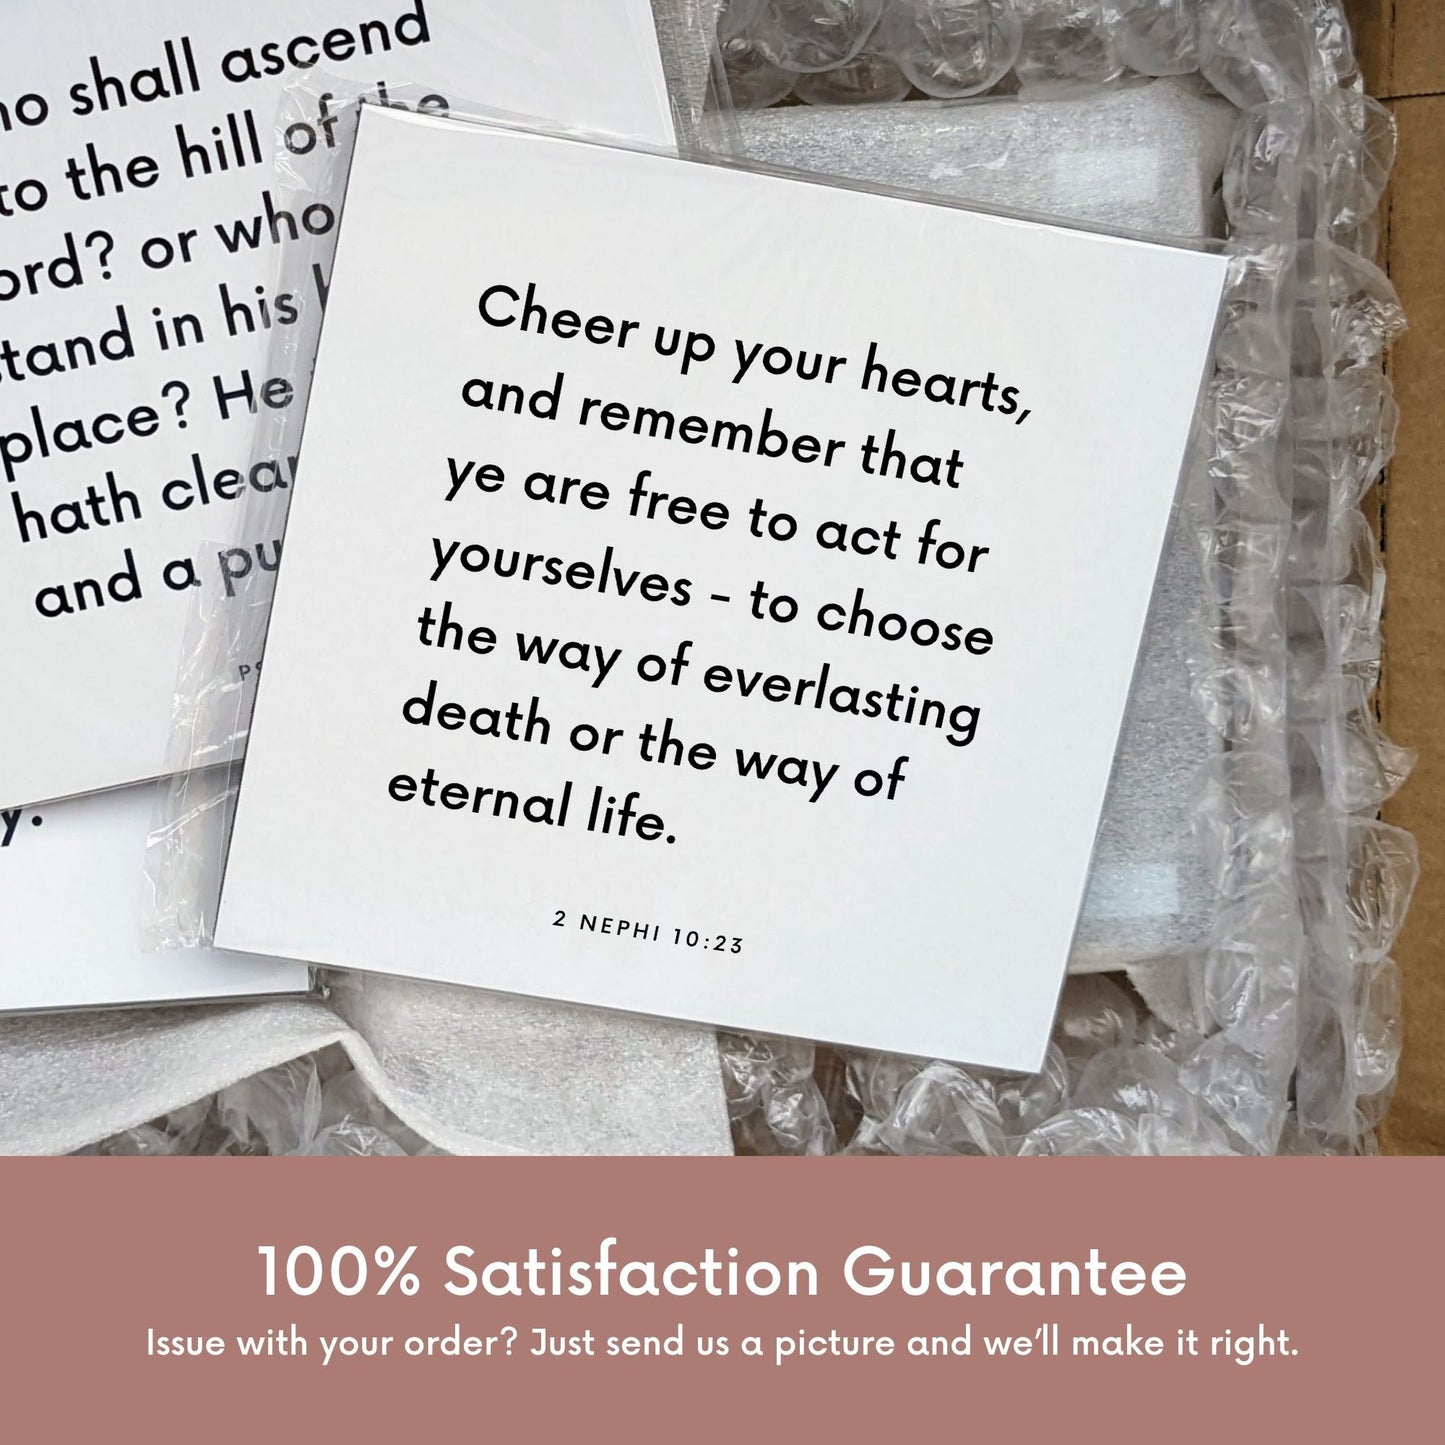 Shipping materials for scripture tile of 2 Nephi 10:23 - "Cheer up your hearts, and remember that ye are free"